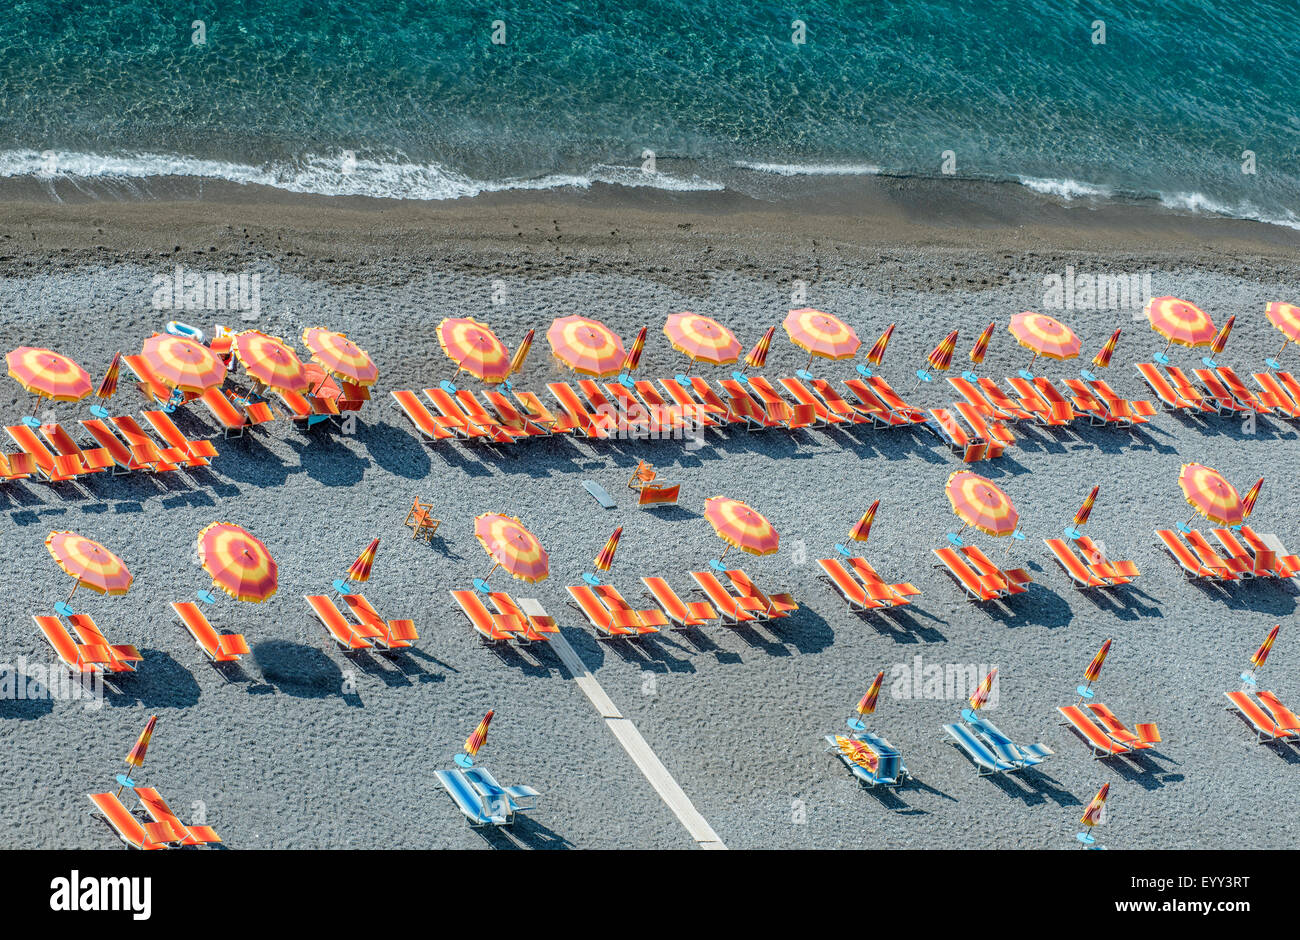 Aerial view of lawn chairs and umbrellas on beach Stock Photo